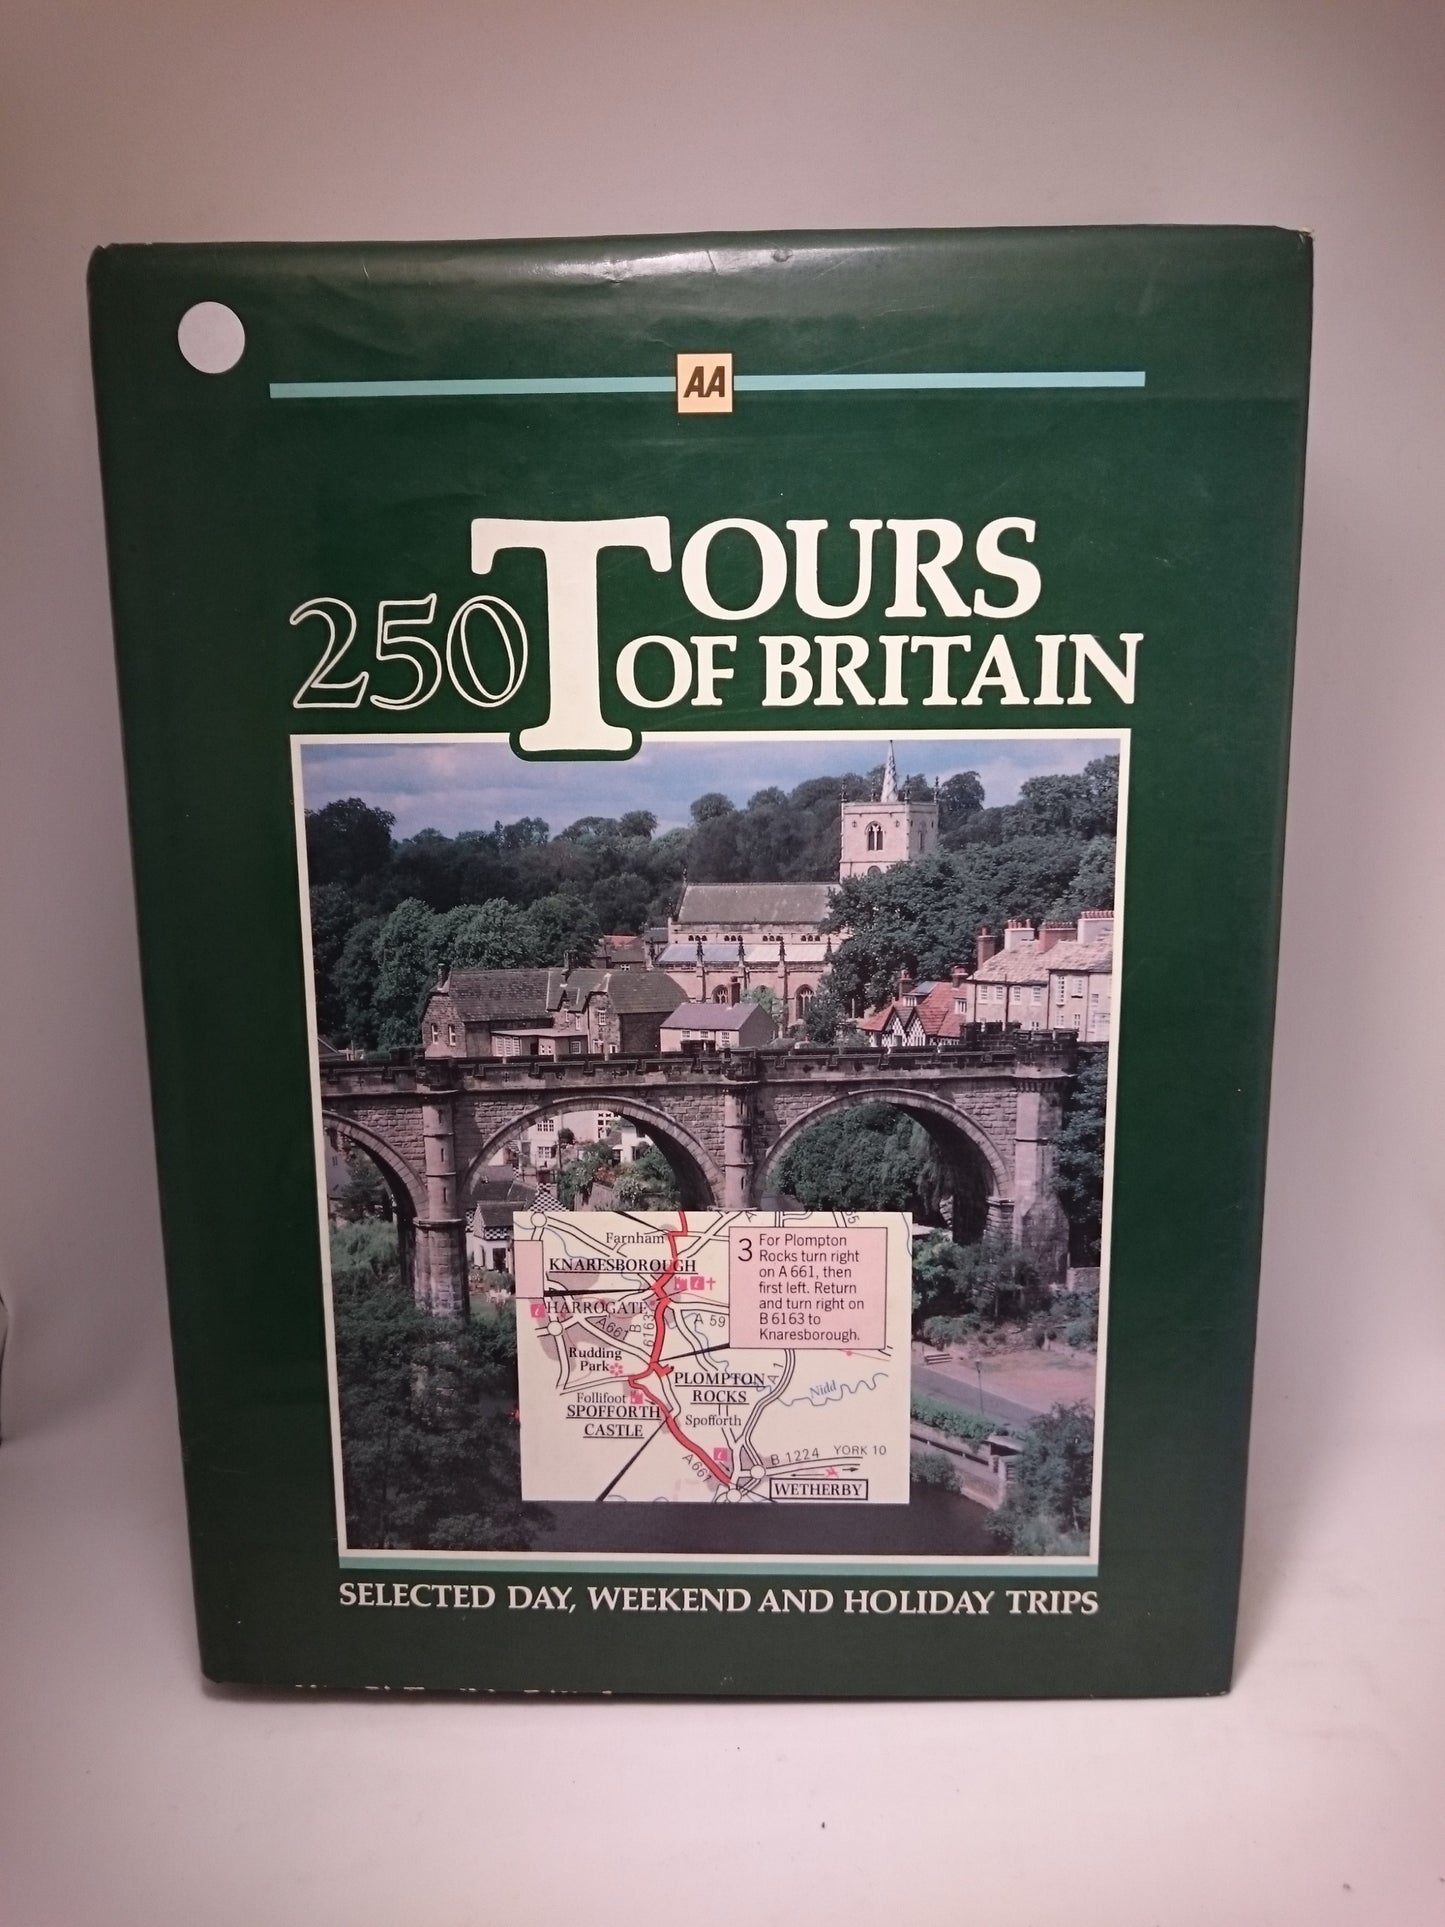 A 250 Tours of Britain